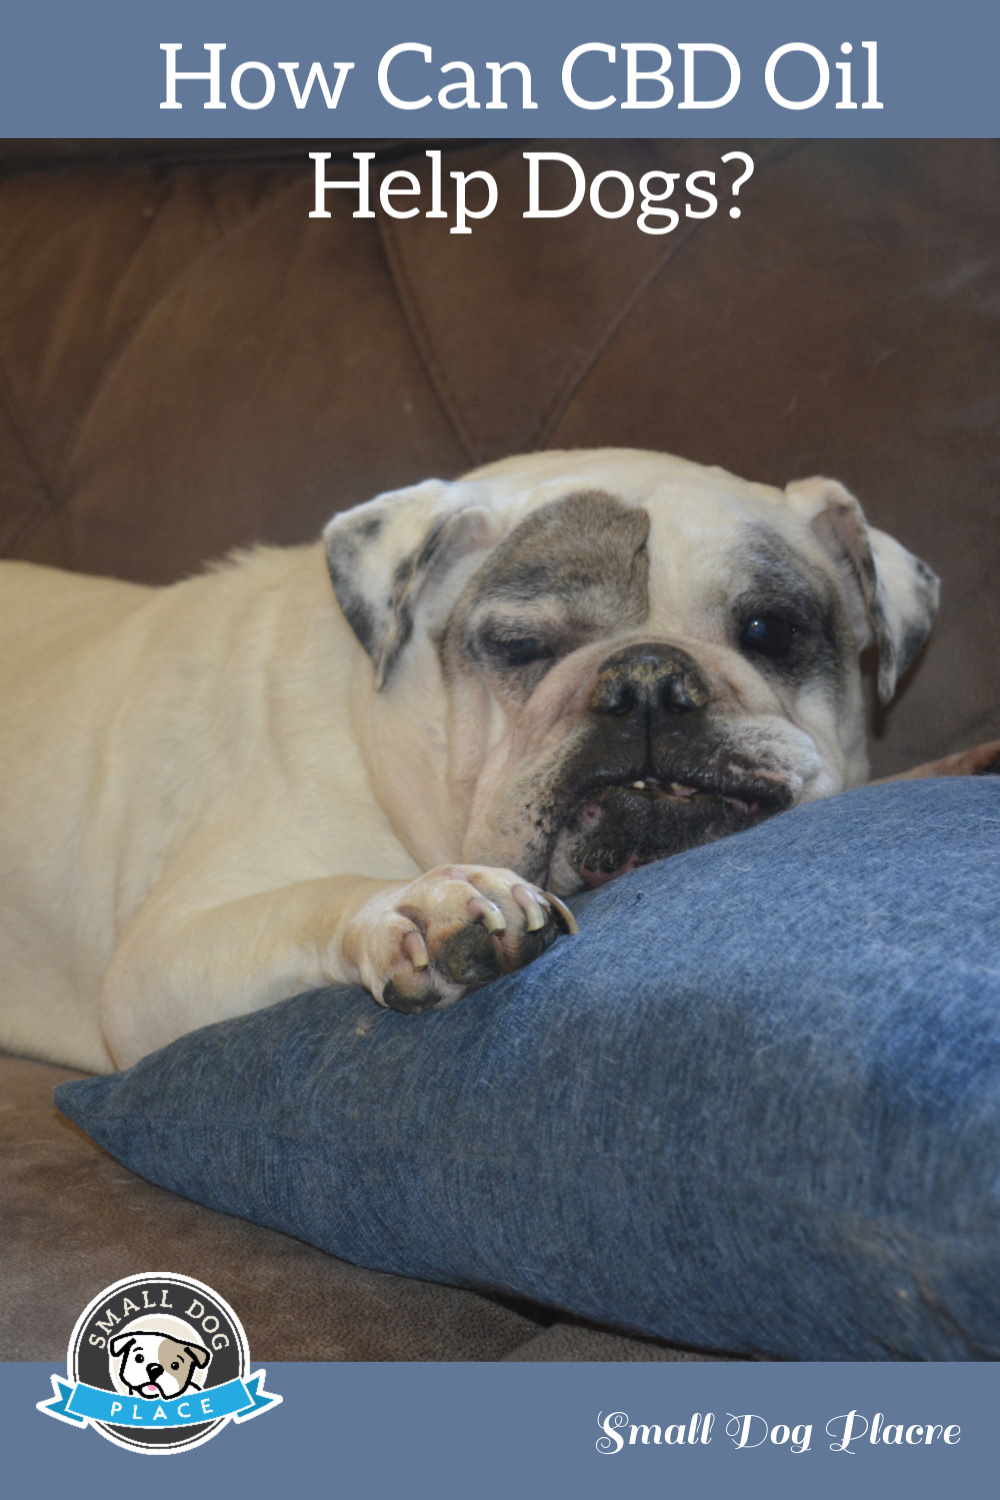 A bulldog helped by CBD oil is laying on a pillow on a sofa.